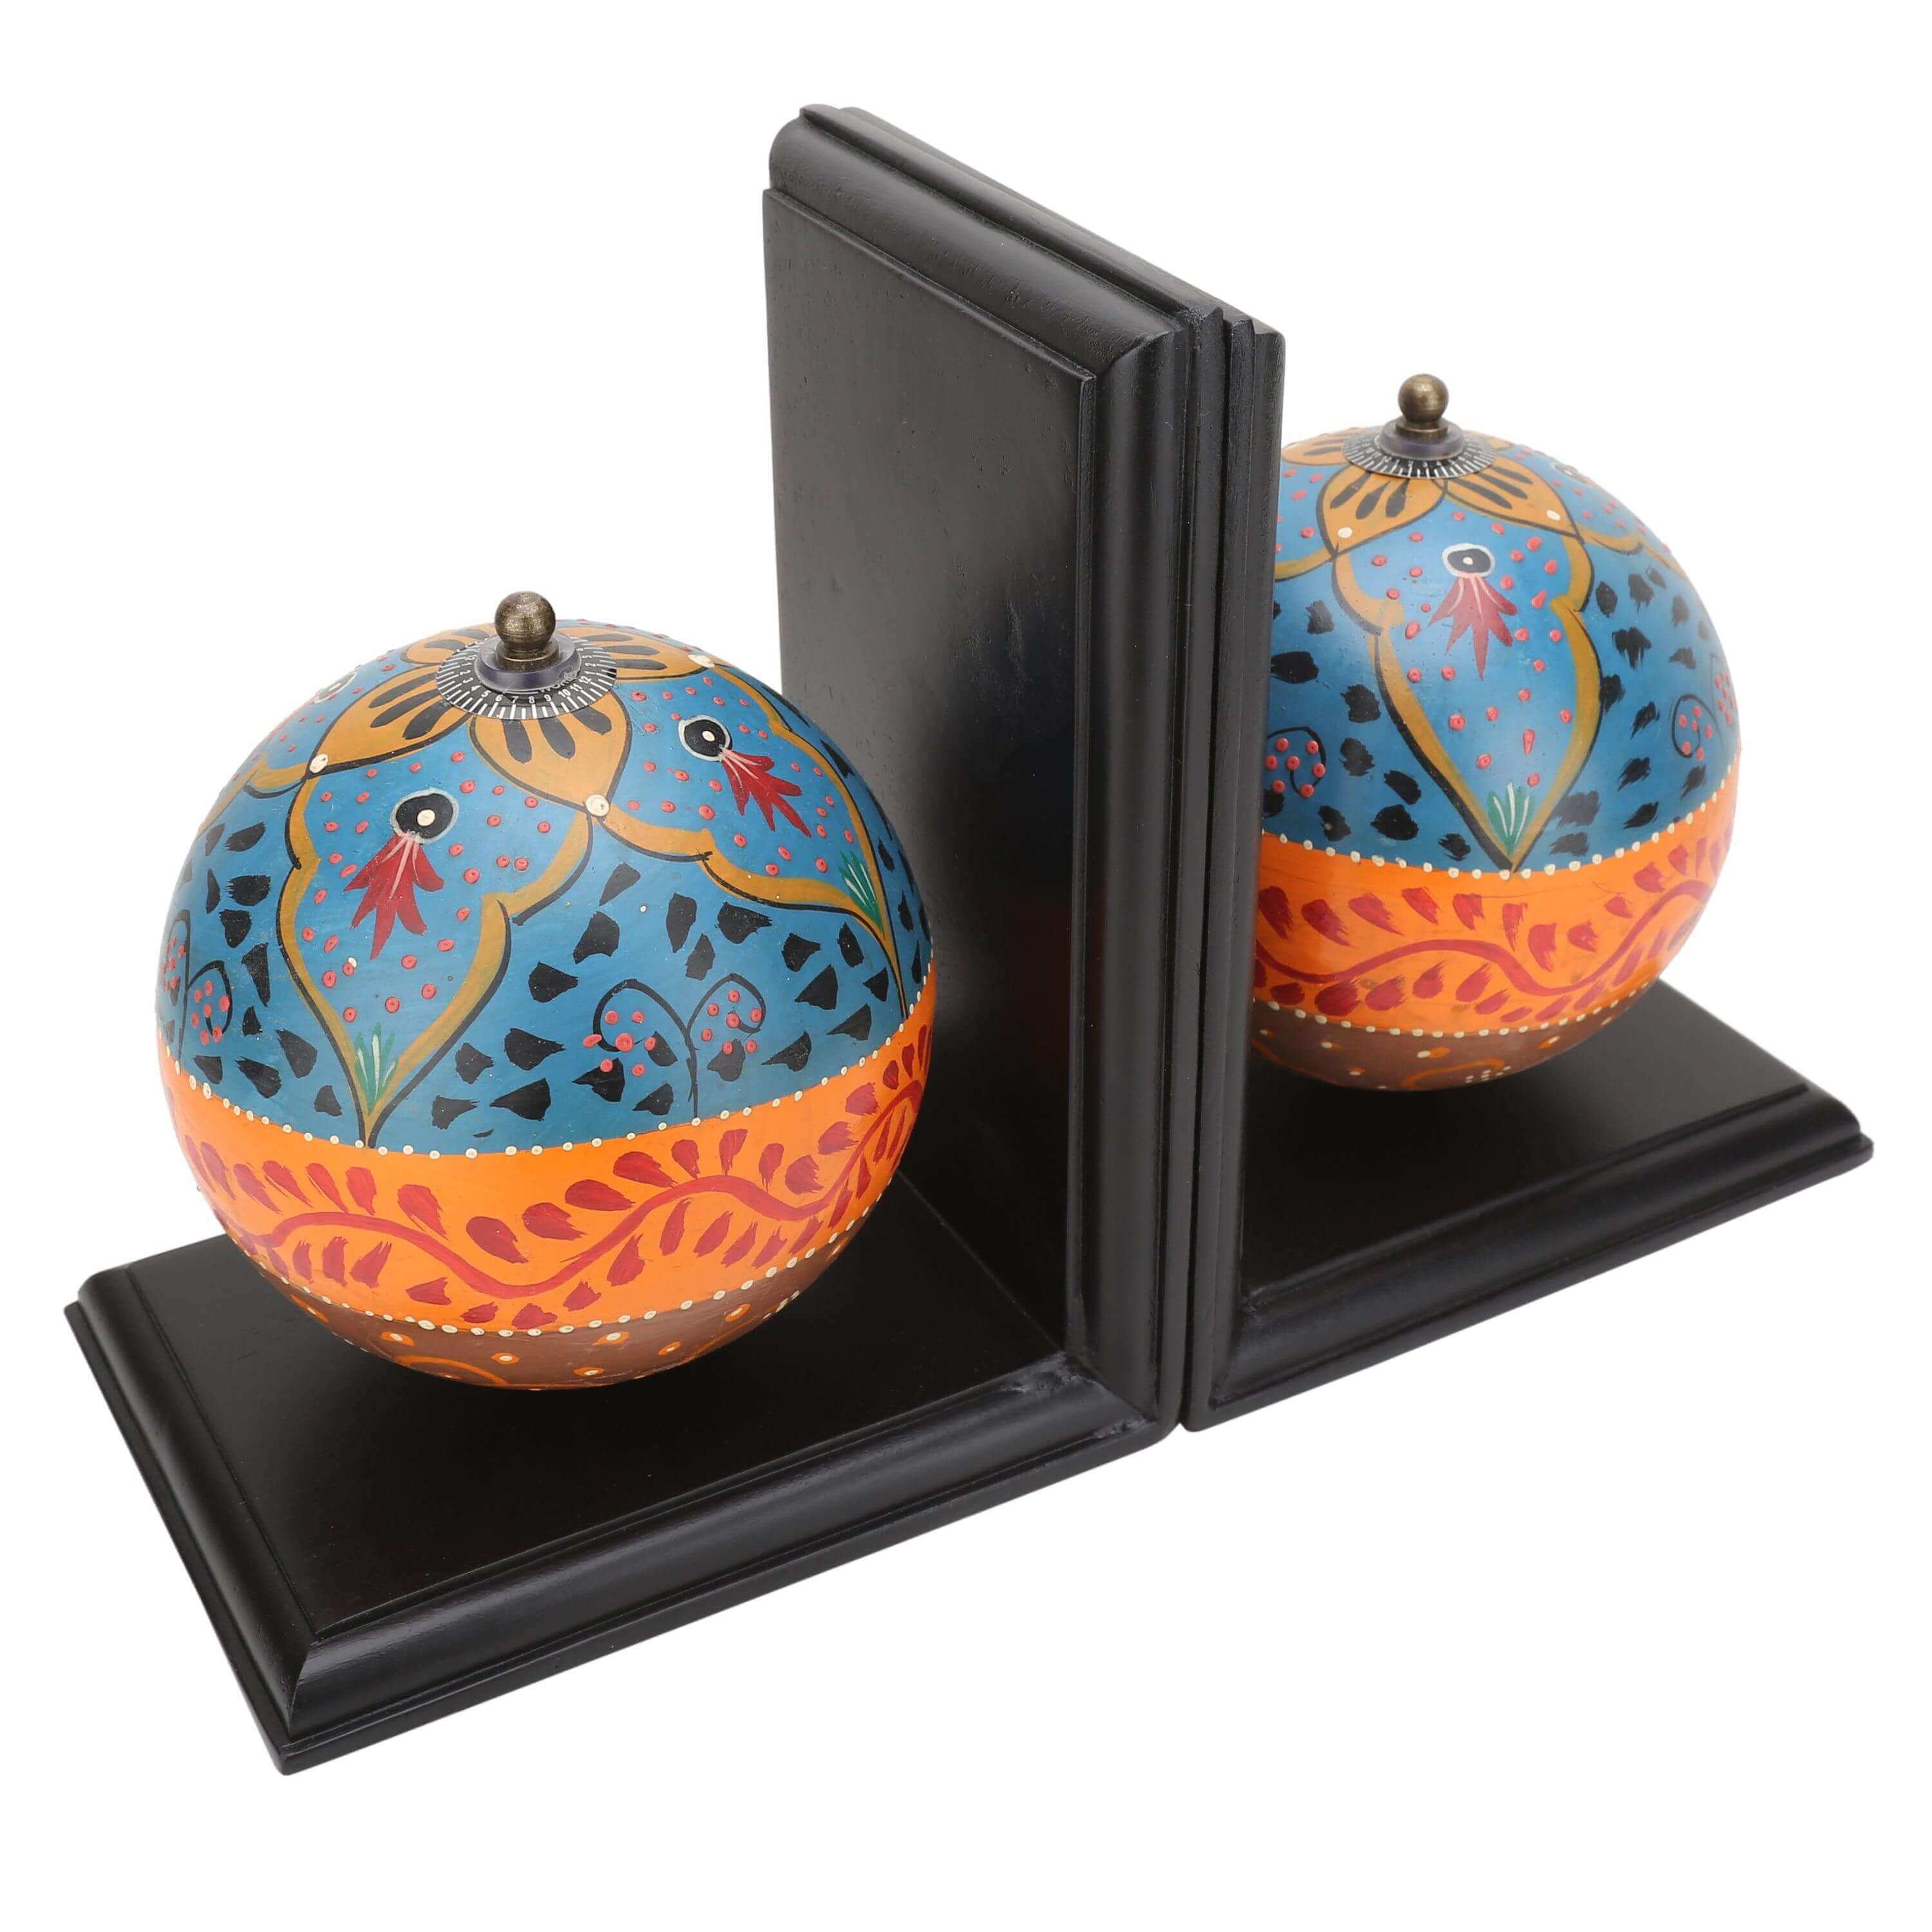 Exclusive Hand Painted Globe Bookends - Make in Modern